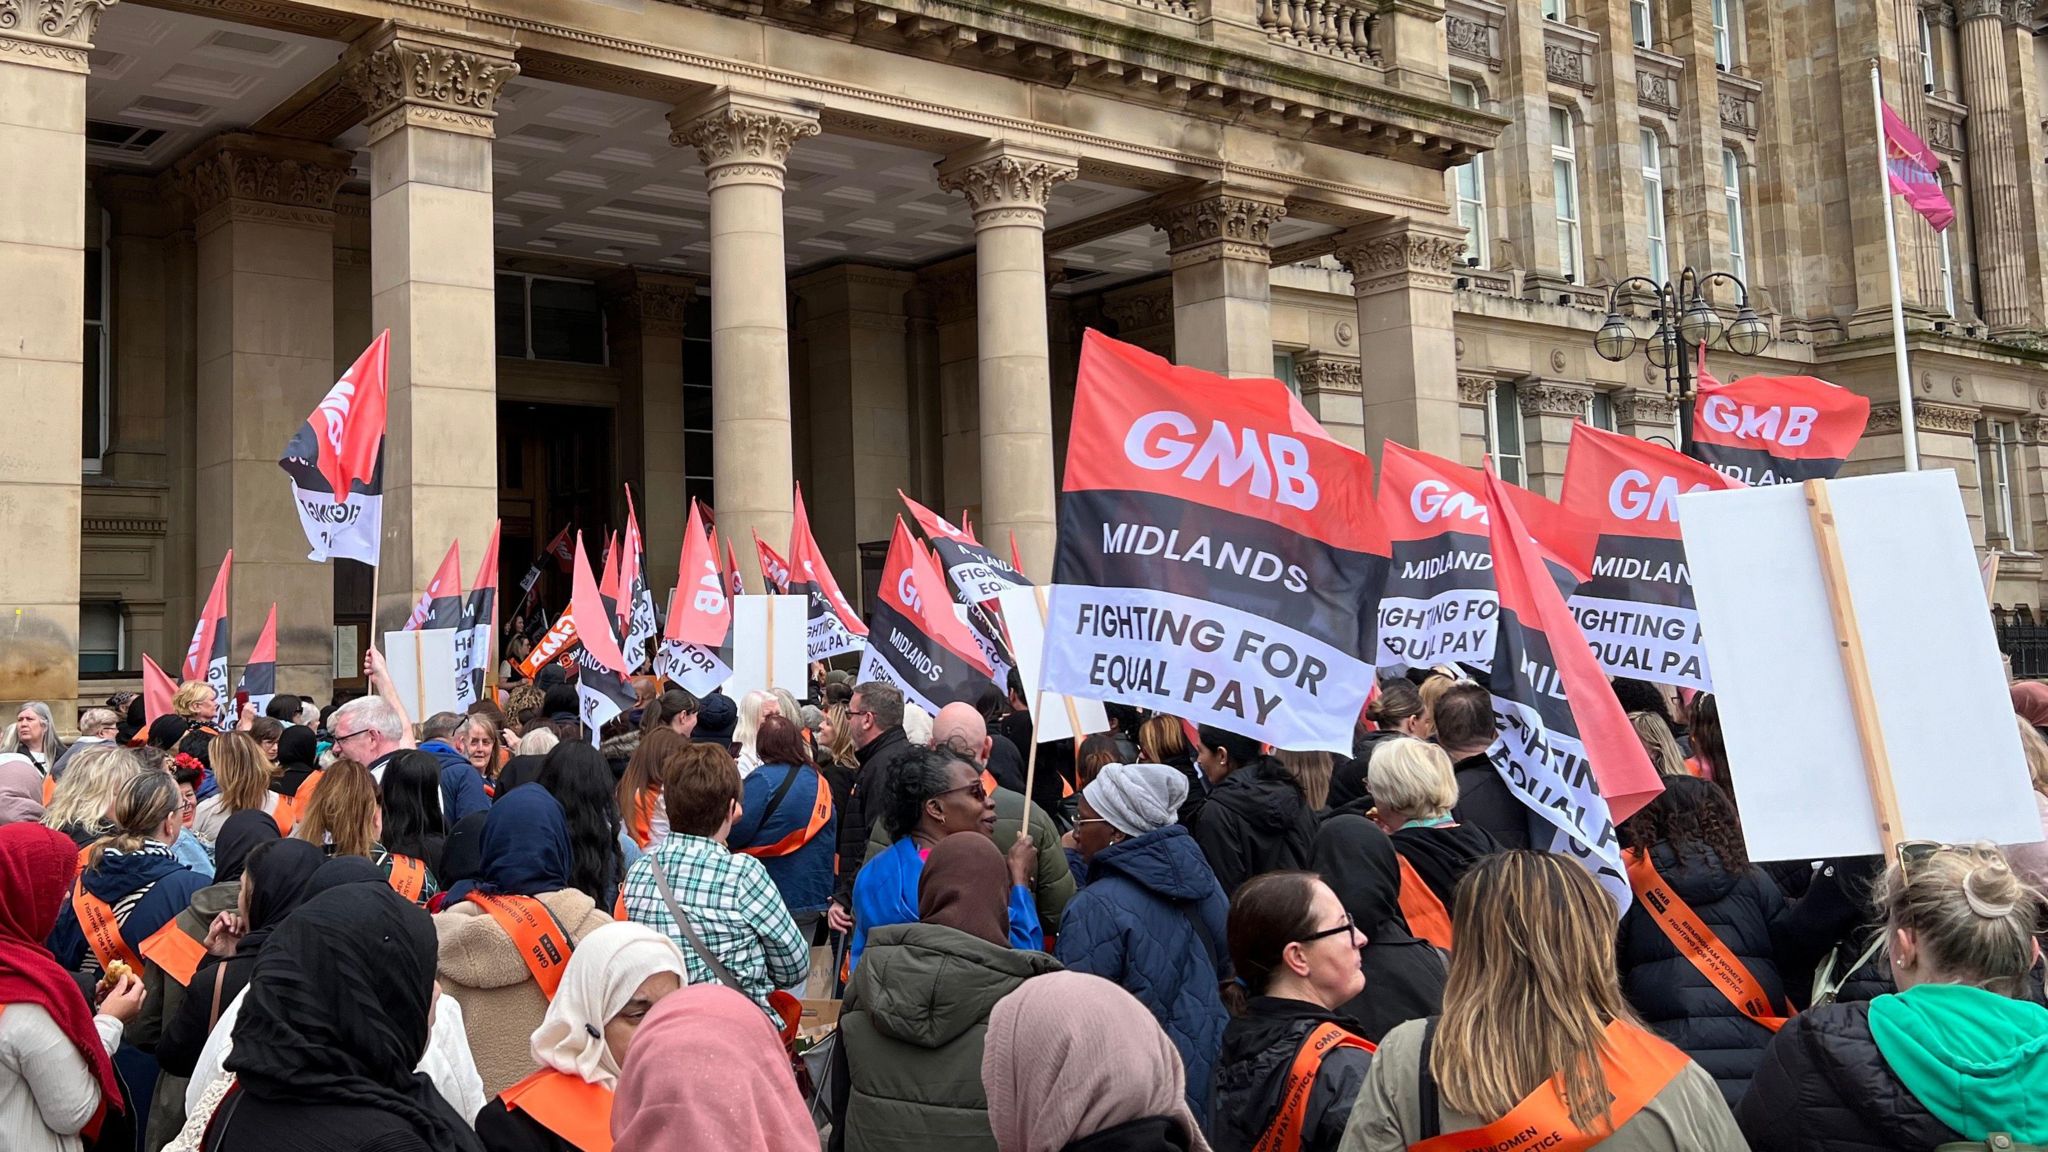 A crowd of strike supporters gather outside Birmingham City Council House waving flags displaying the message GMB Midlands Fighting For Equal Pay